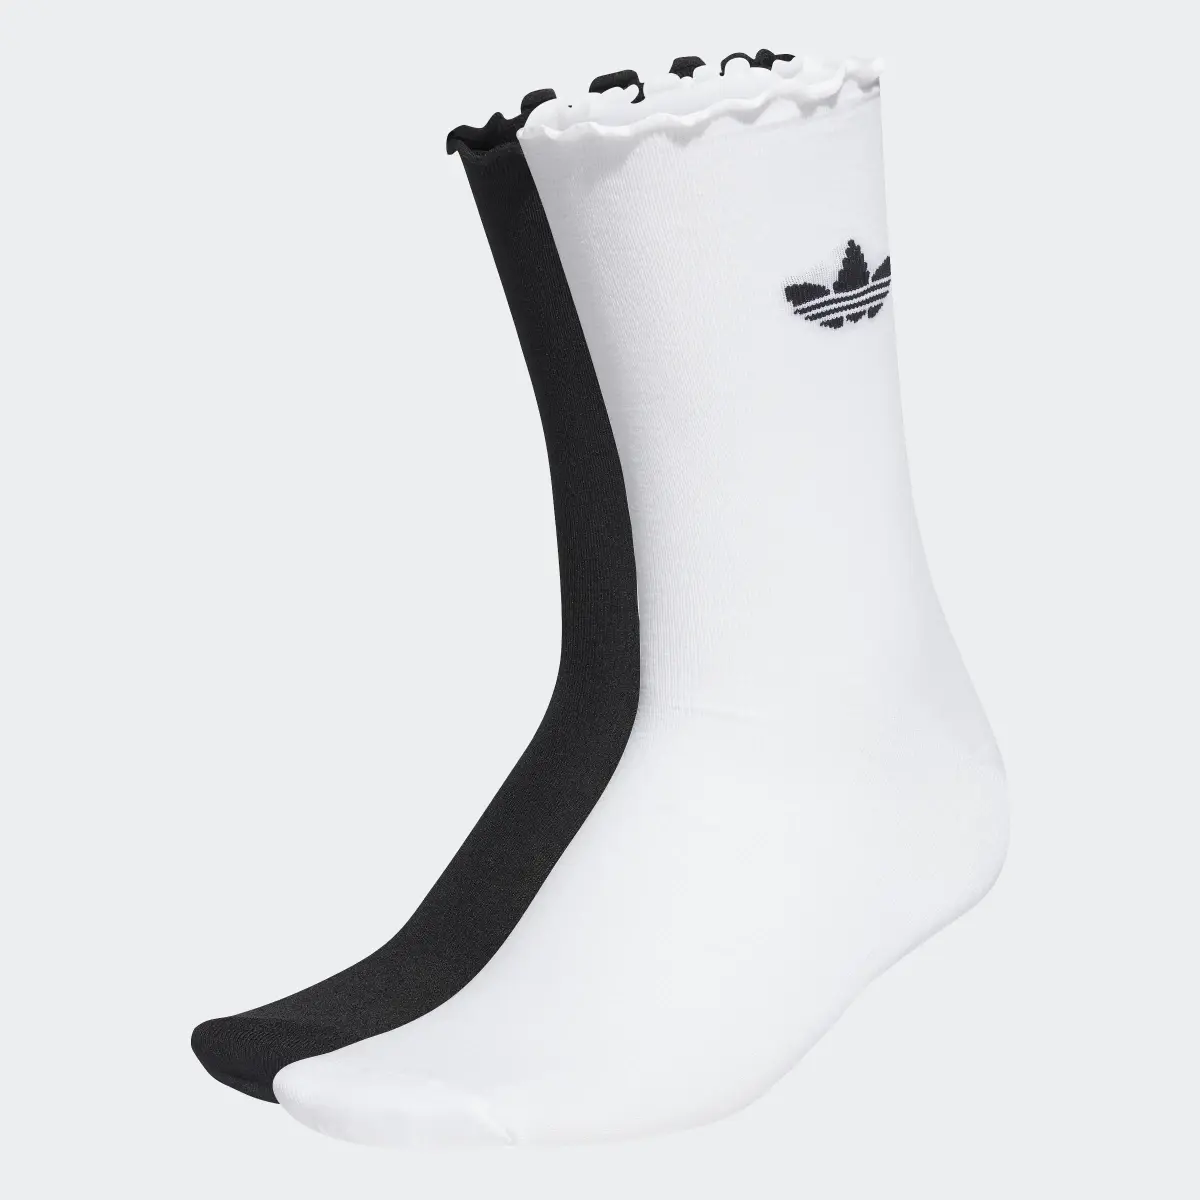 Adidas Chaussette Semi-Sheer Ruffle (2 paires). 2